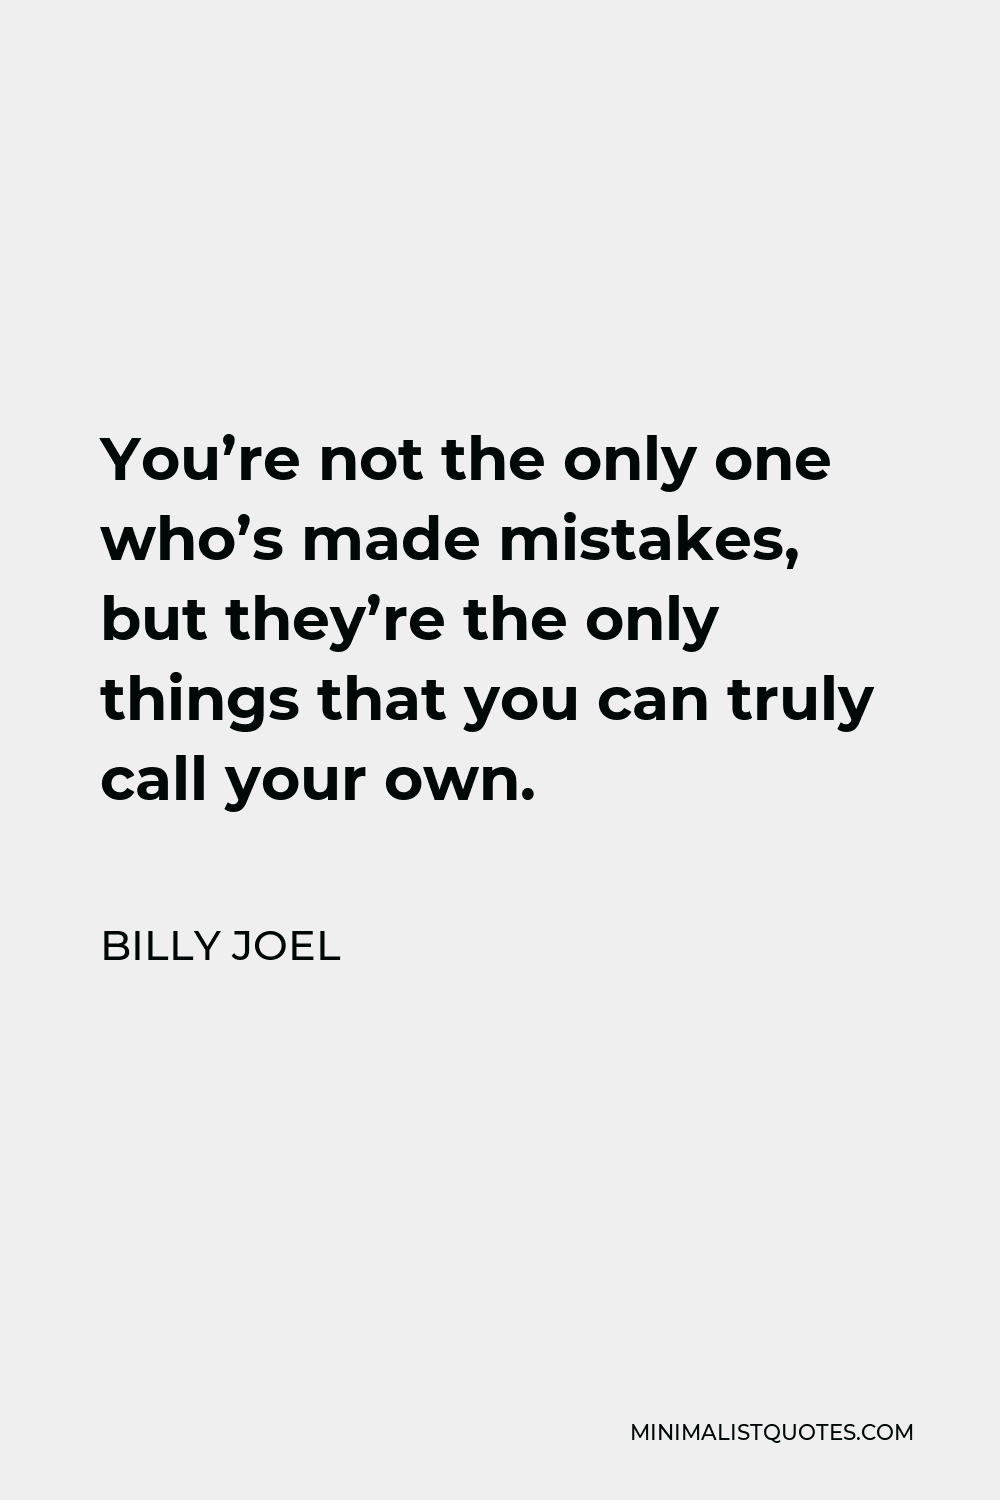 Billy Joel Quote - You’re not the only one who’s made mistakes, but they’re the only things that you can truly call your own.